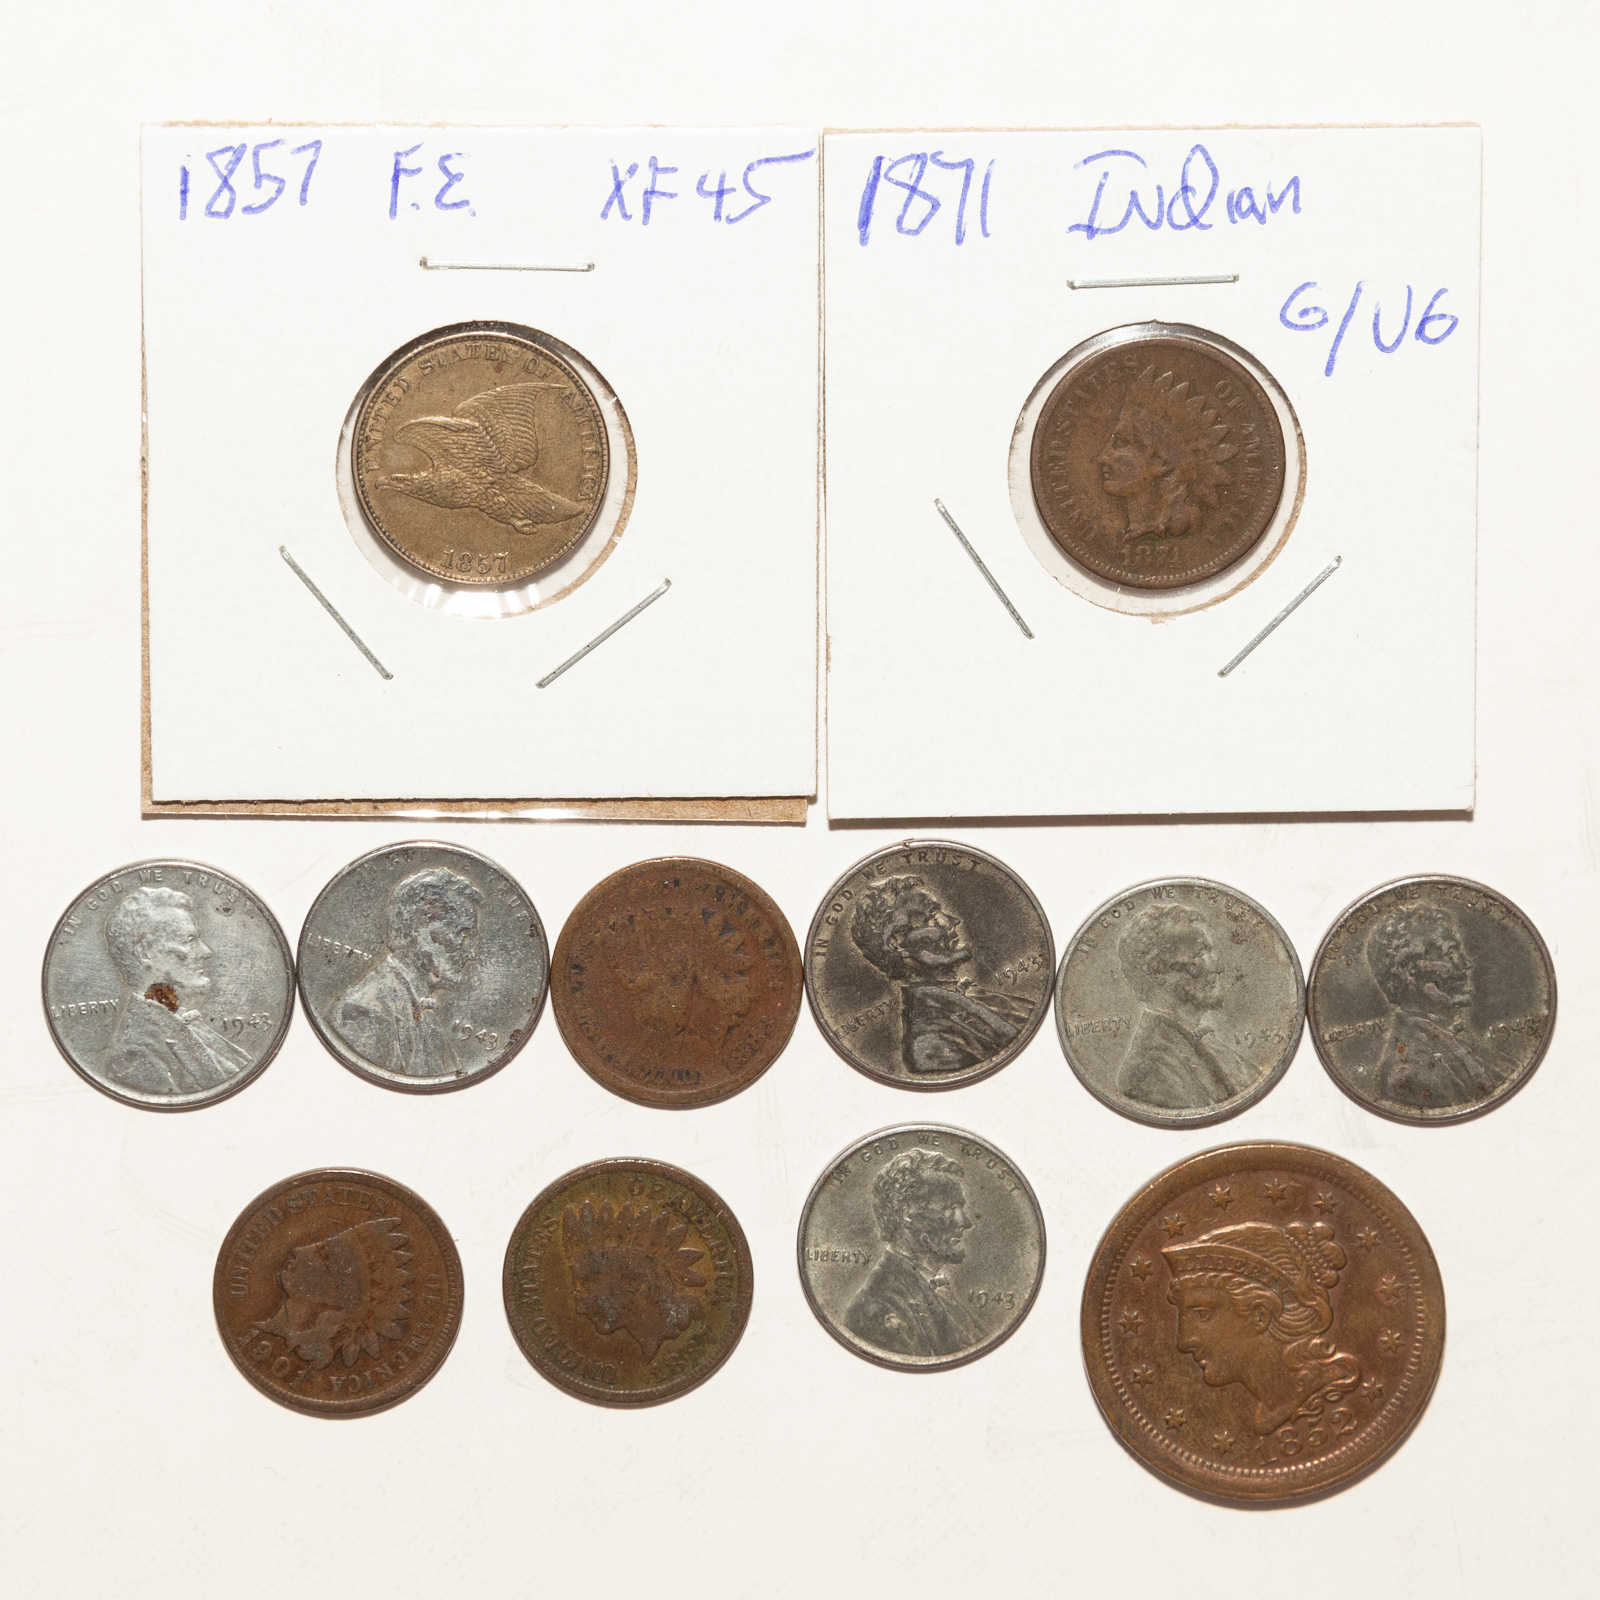 FAMILY CENTS - INCLUDING XF45 1857